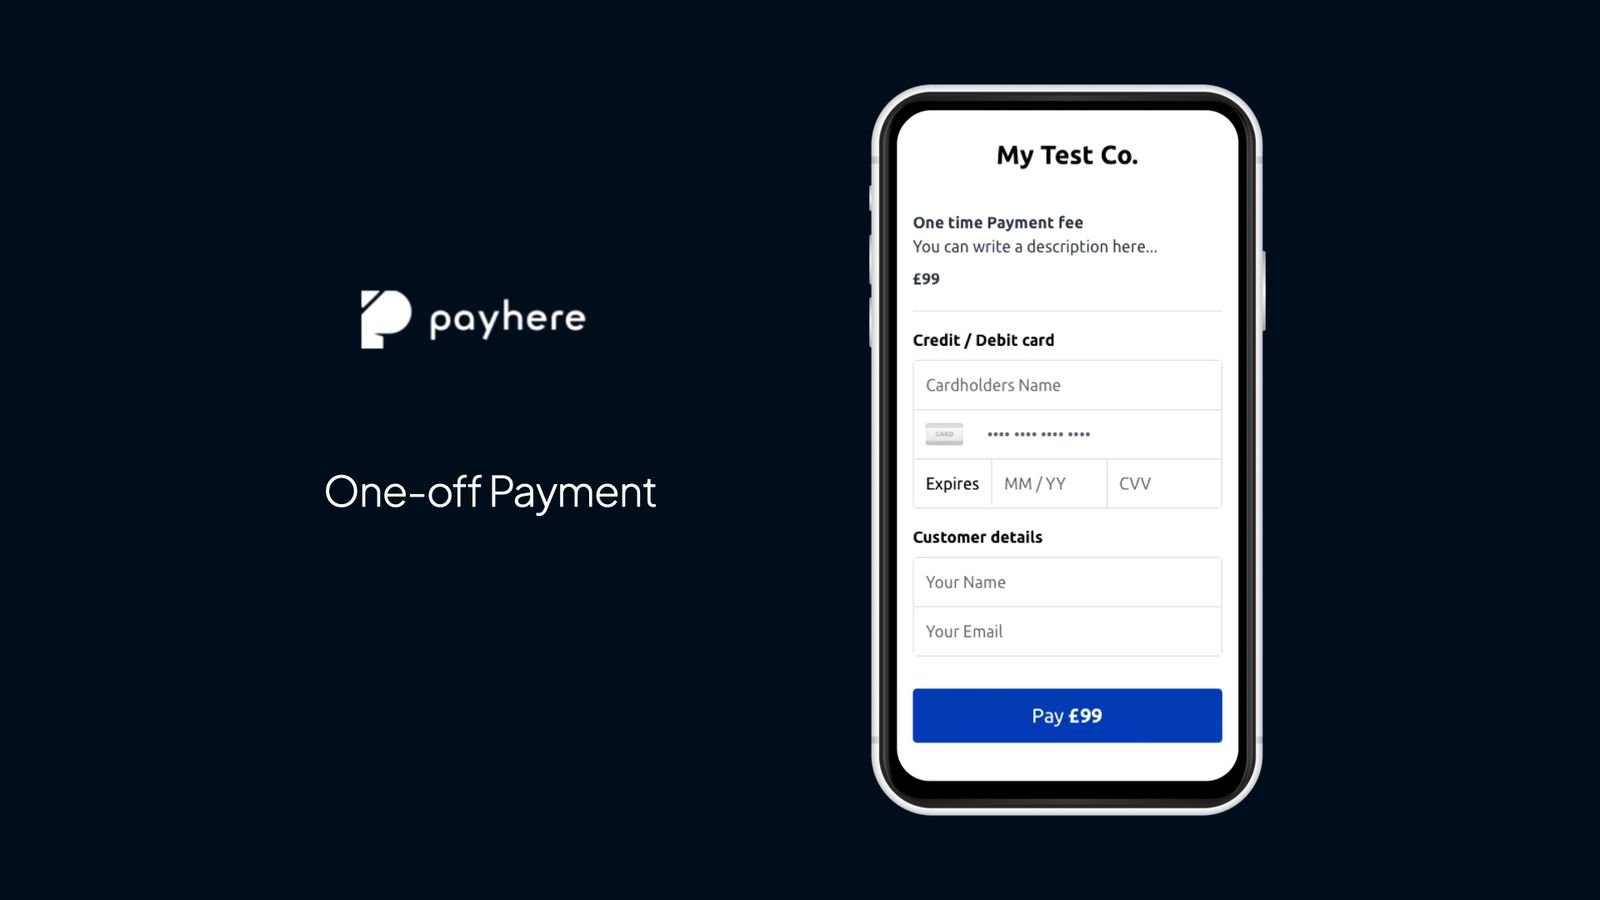 Creating a one-off payment link